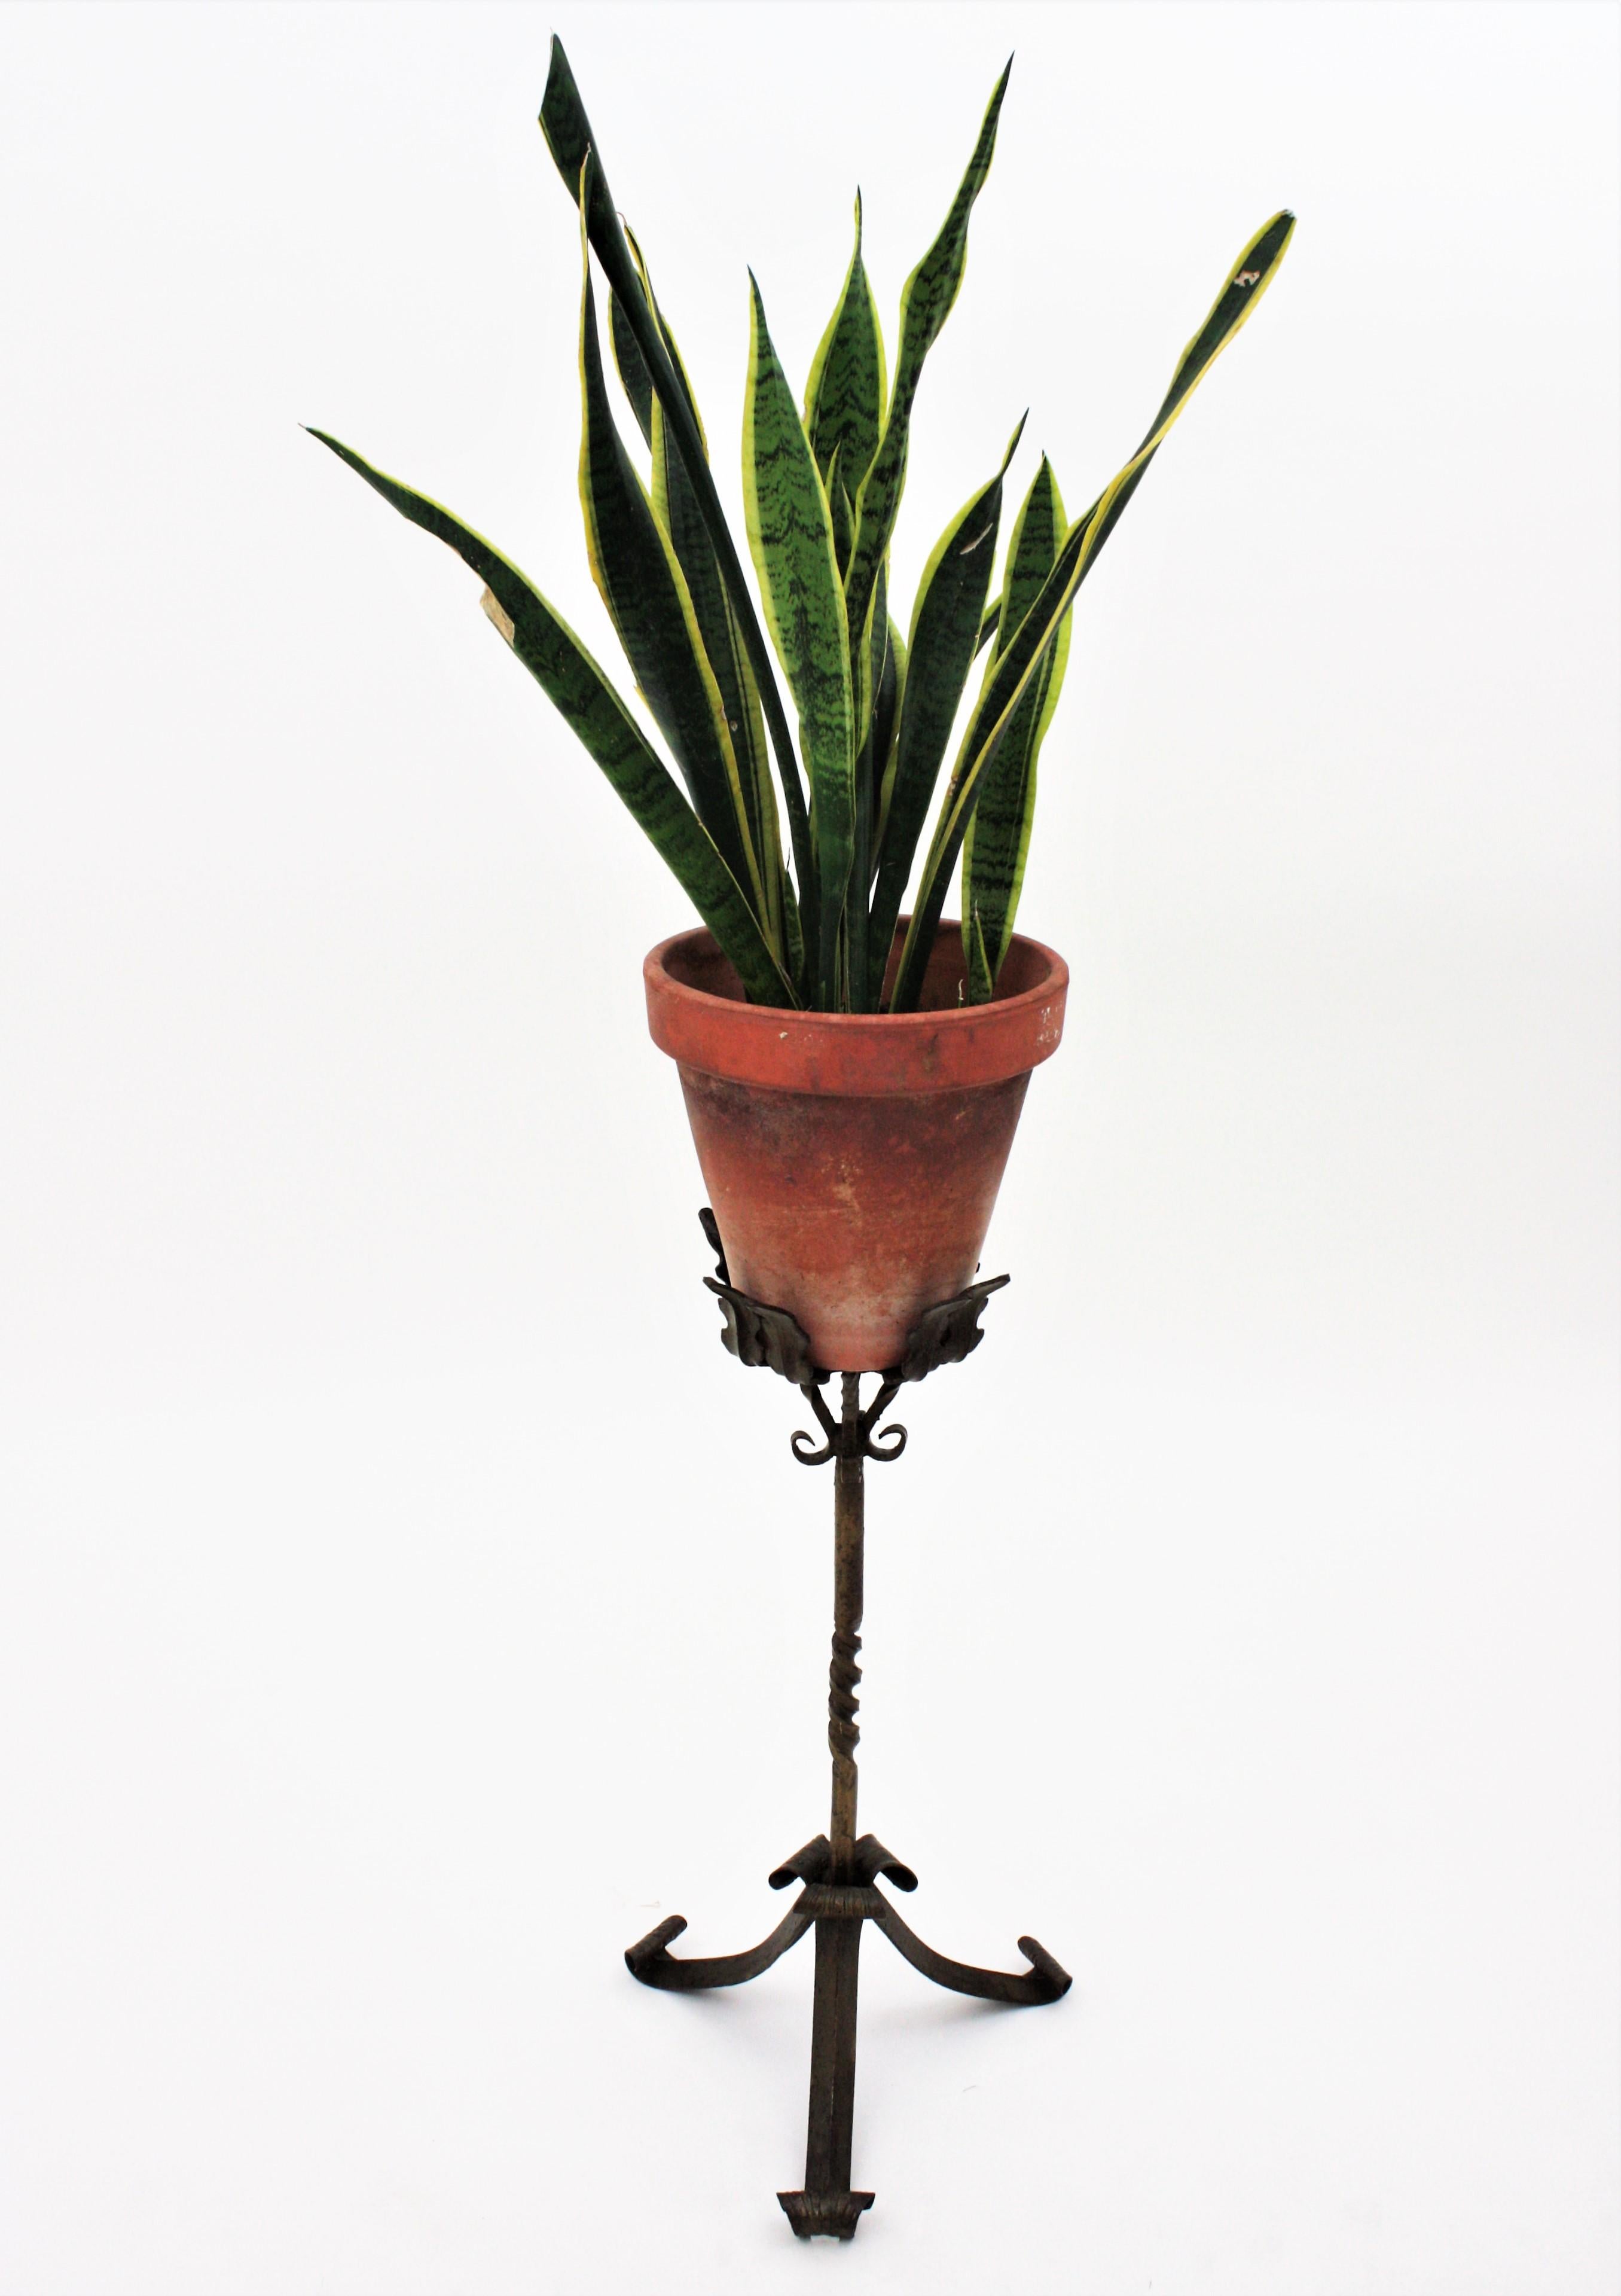 Parcel-gilt Gothic style hand forged iron plant stand on a tripod base, Spain, 1930s-1940s.
This stand in all made in hand-hammered iron and features a leafed top twith scroll details where place a plant pot. The top stands on a tripod base with